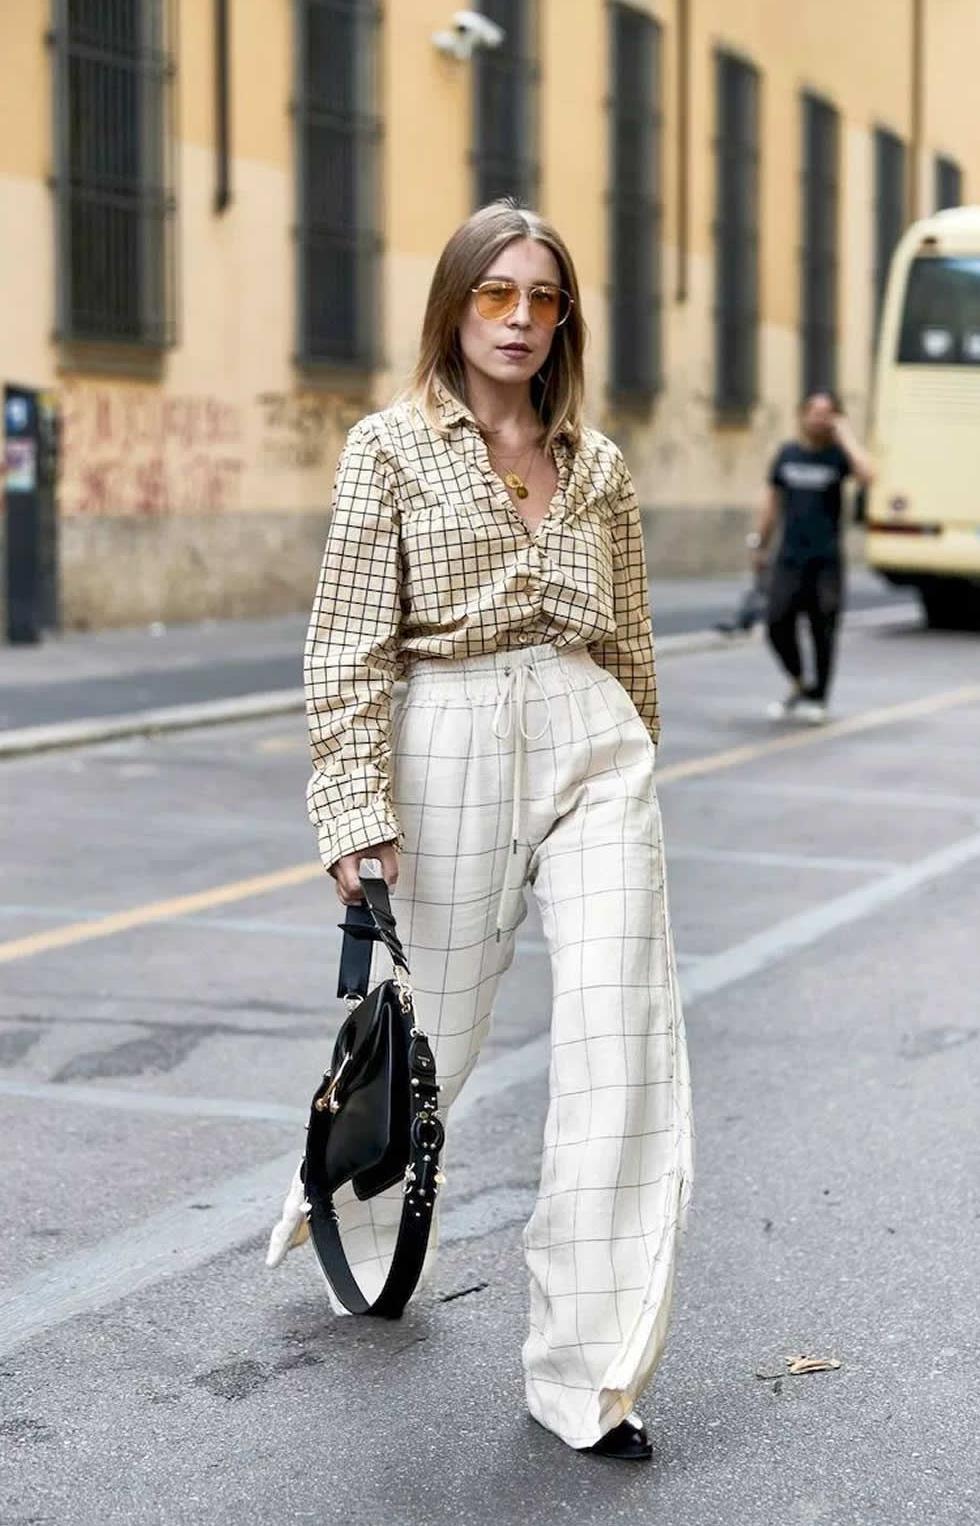 Smart Casual Outfit Ideas For Women: Relaxed Looks For Business Hours 2023